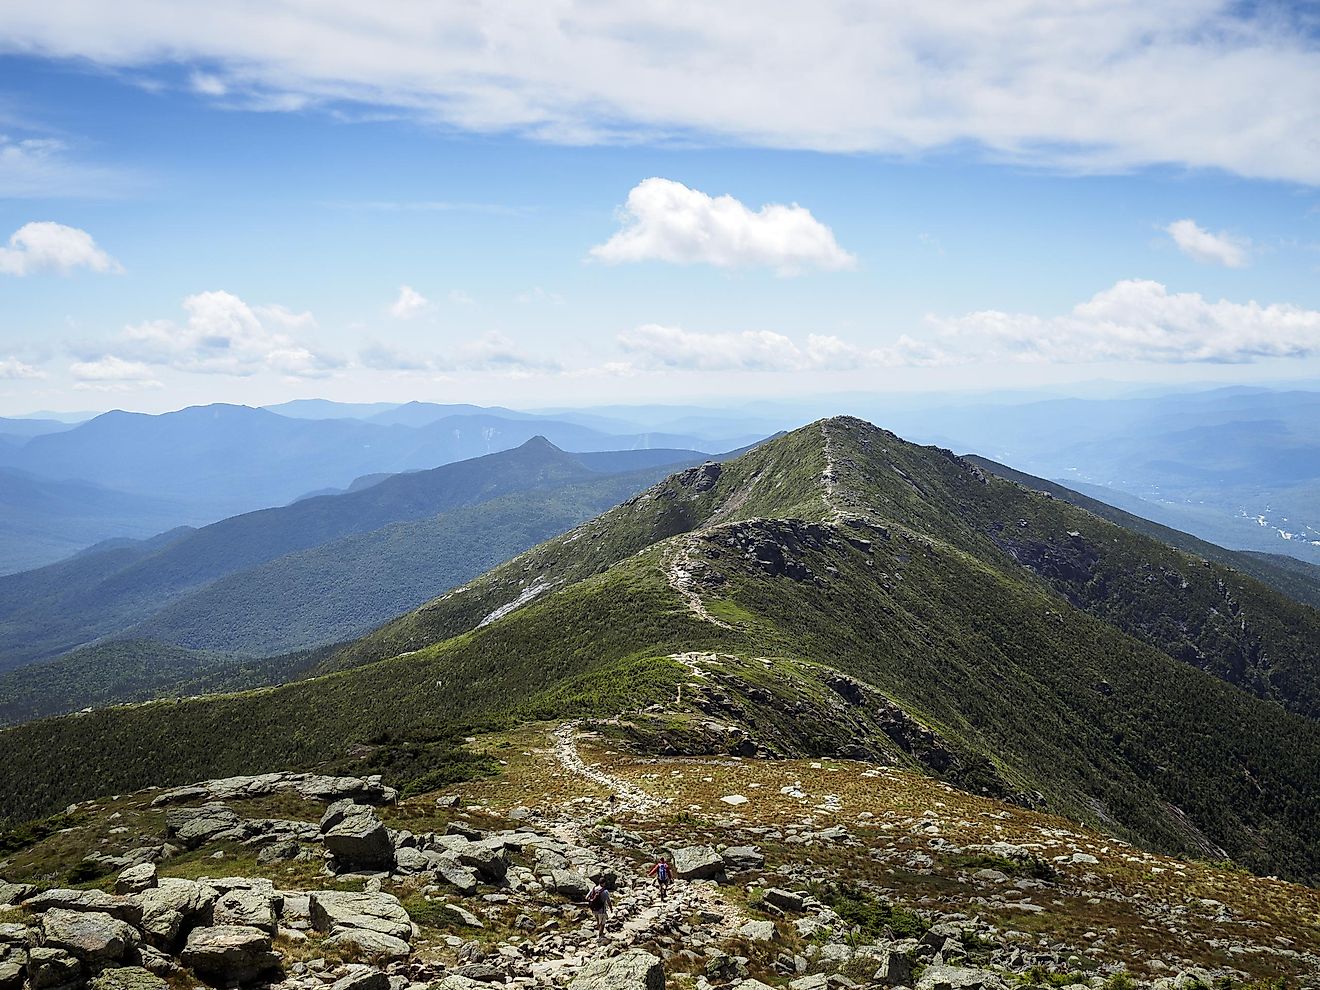 Appalachian Trail on a sunny day in White Mountains Franconia Ridge, New Hampshire